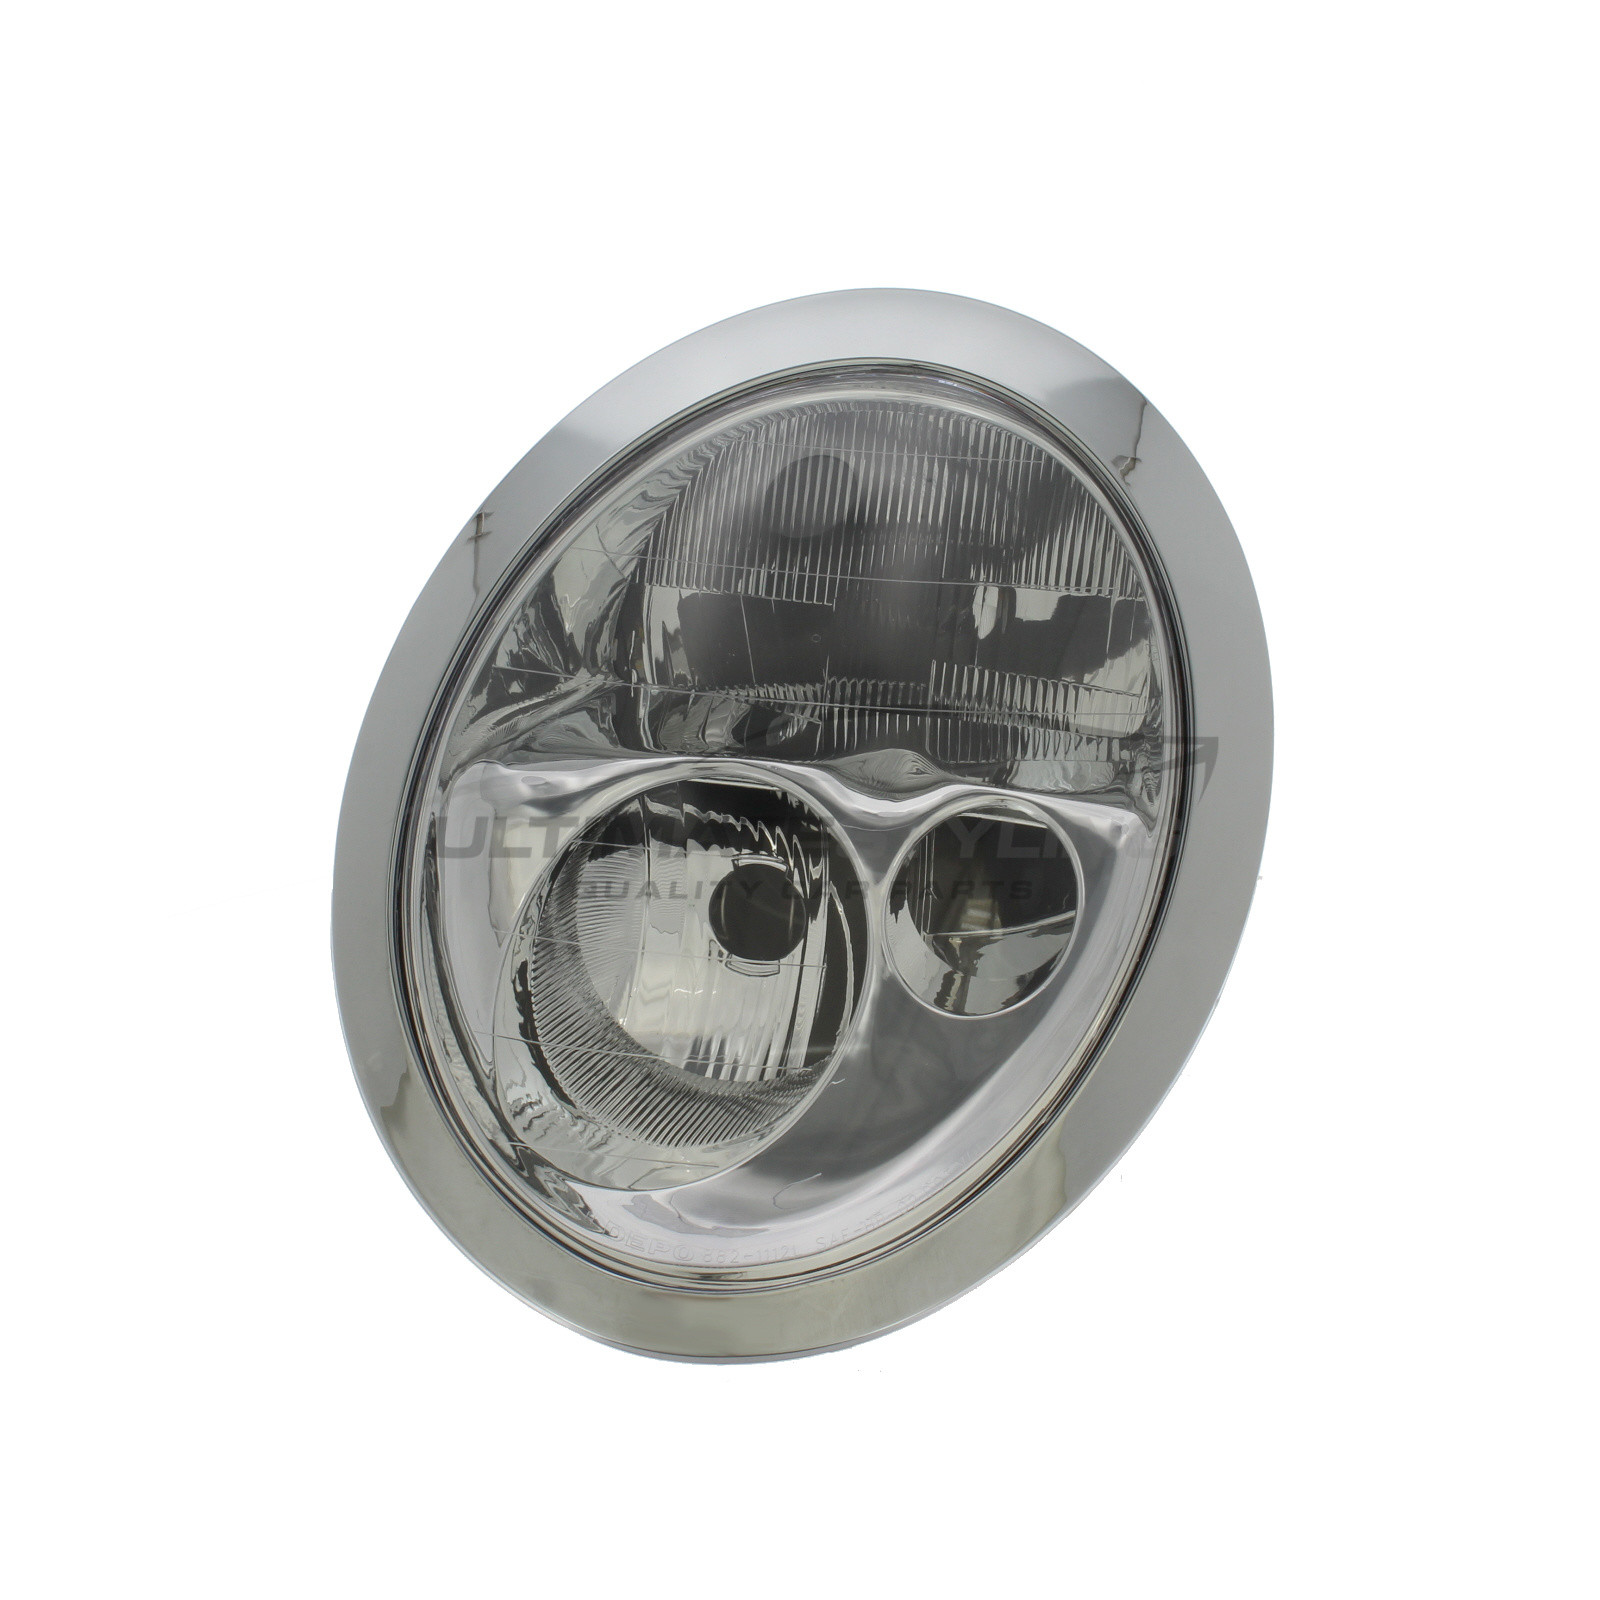 Mini 2001-2004 Halogen, Electric With Motor, Chrome Headlight / Headlamp Including Clear Indicator Passengers Side (LH)